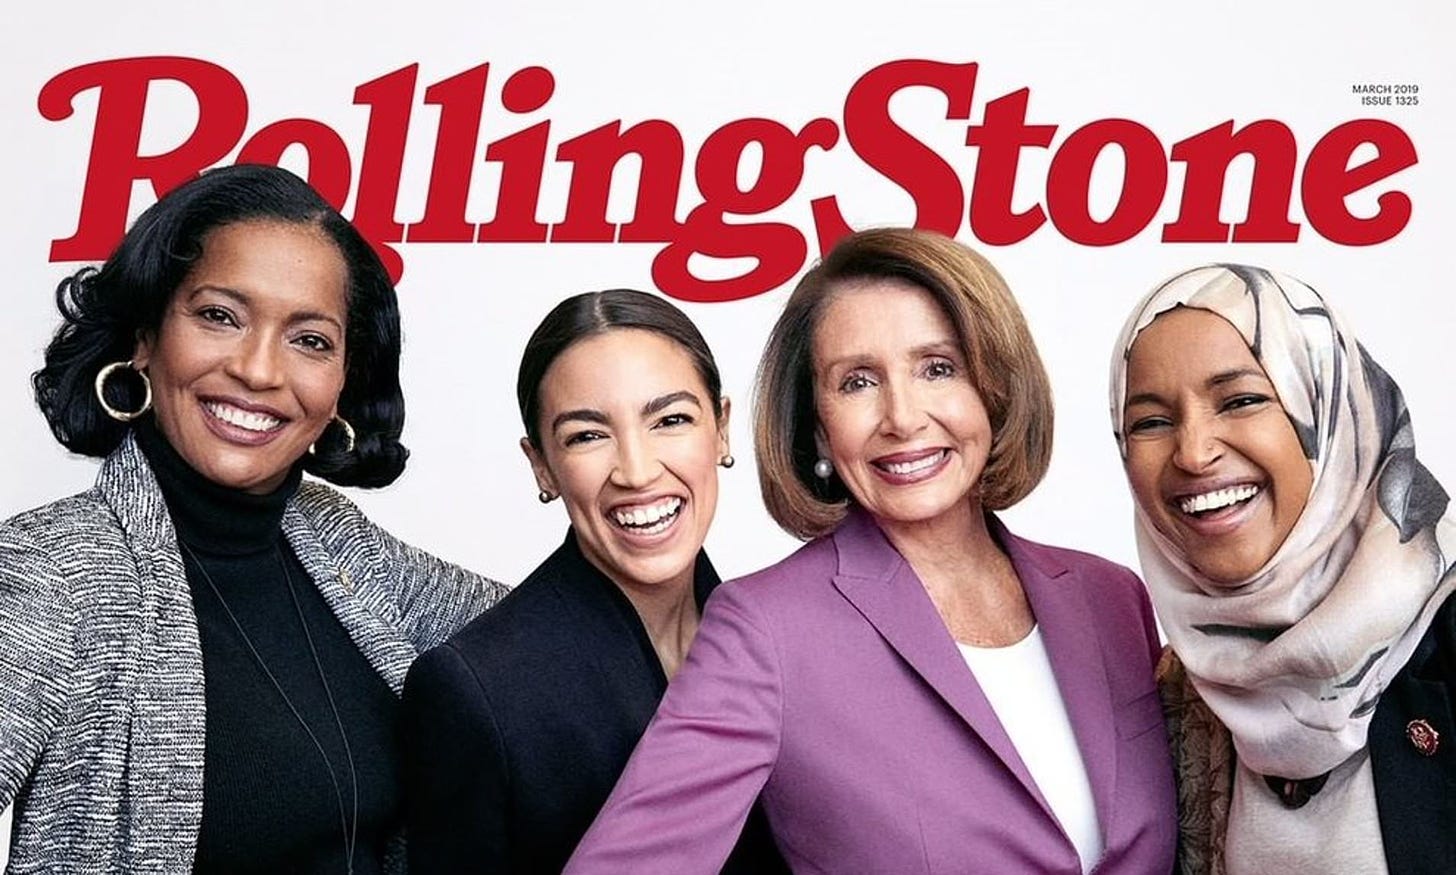 AOC joins Ilhan Omar, Jahana Hayes, Nancy Pelosi on cover of Rolling Stone  magazine | Daily Mail Online